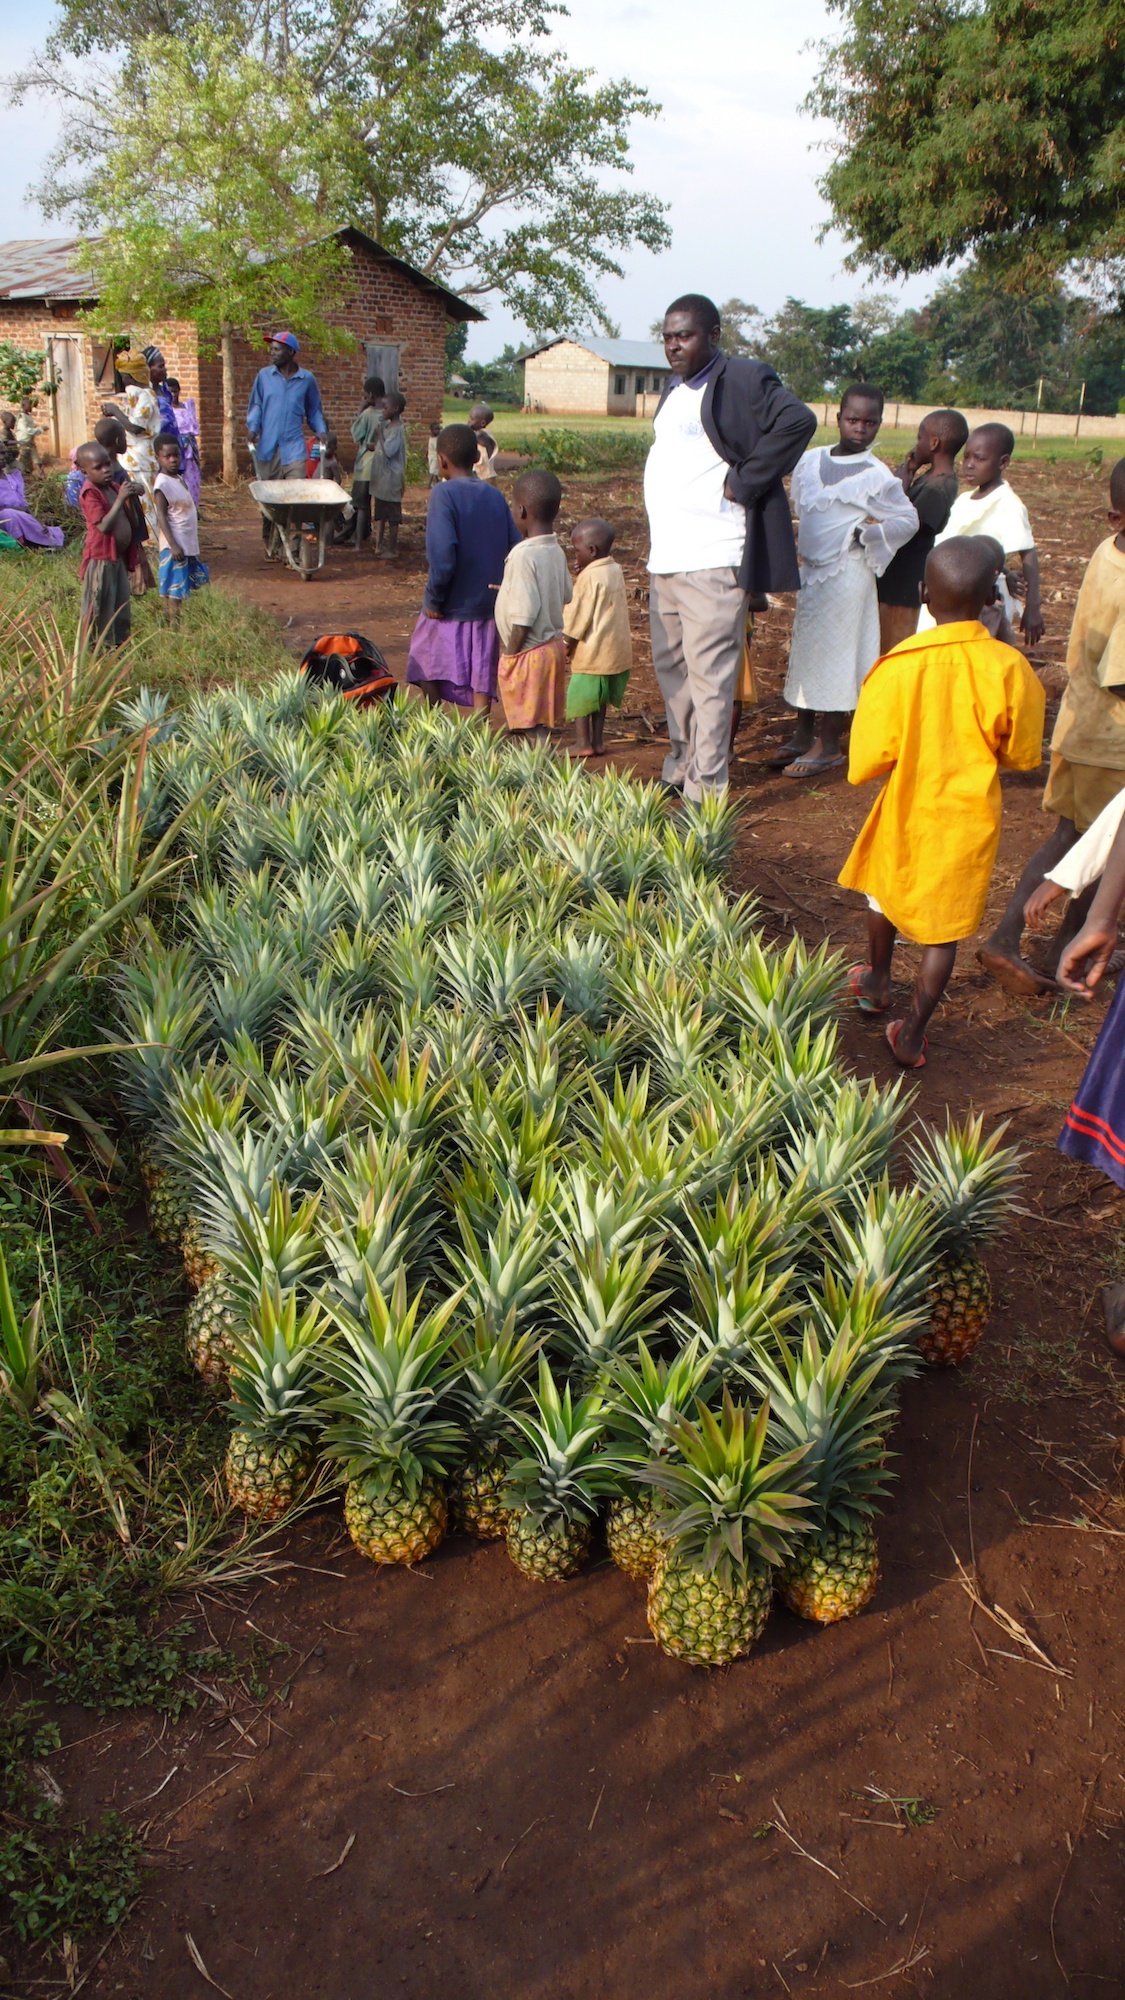 Group of people in front of harvested pineapples